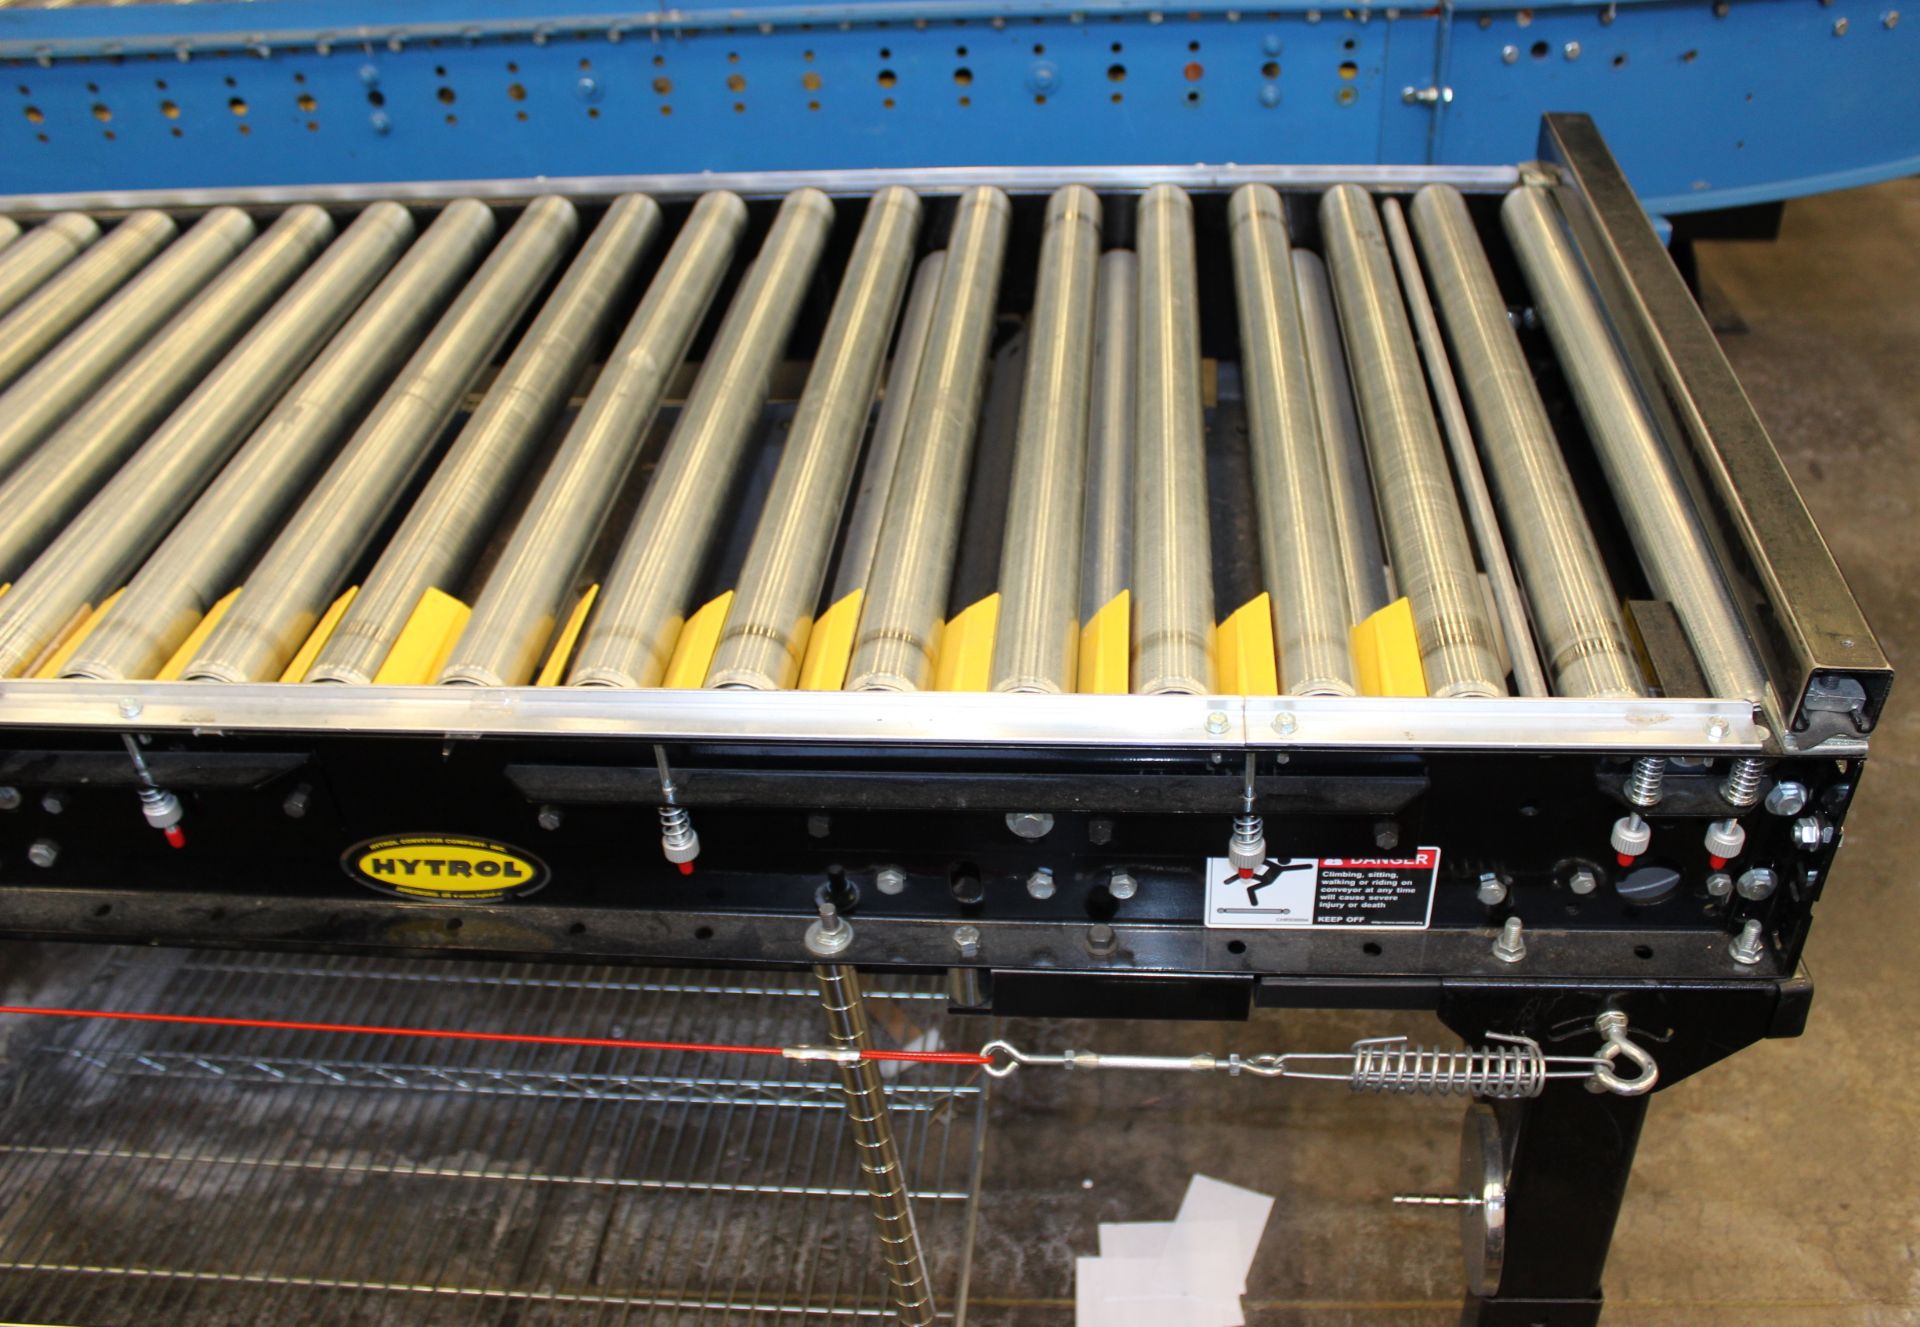 35 FT LONG HYTROL POWERED CONVEYOR, CLICK HERE TO WATCH VIDEO - Image 6 of 6